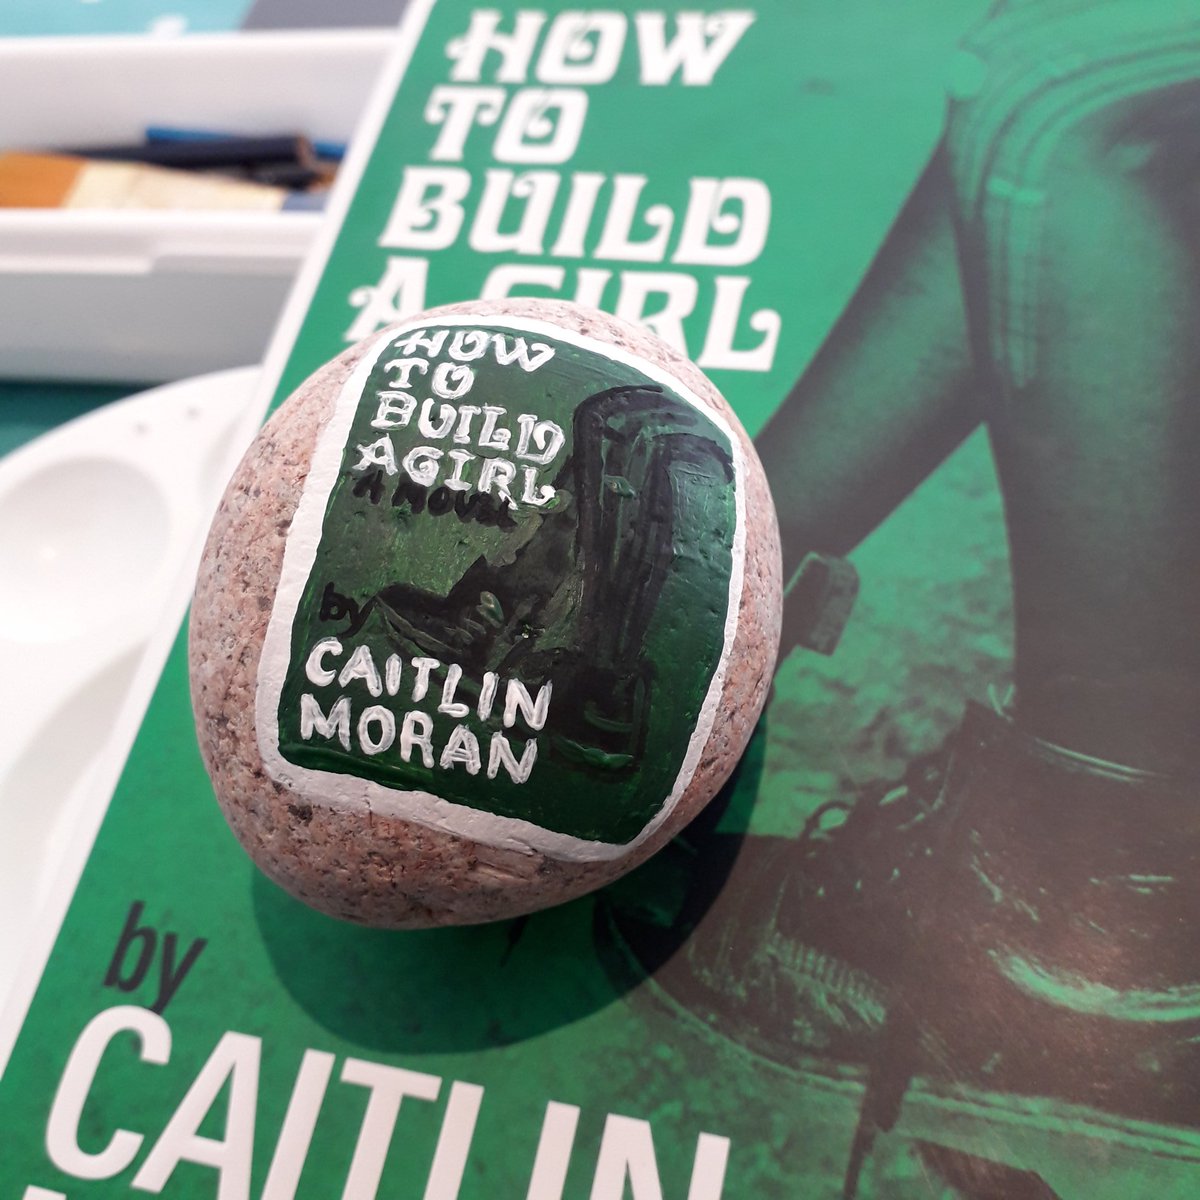 Next book-painted-on-a-rock-to -be-hidden-in-my-library-once-it's -open-again is How To Build A Girl by  @caitlinmoran . Luvverly font in this one, tricky to copy. Looking forward to the adaptation!